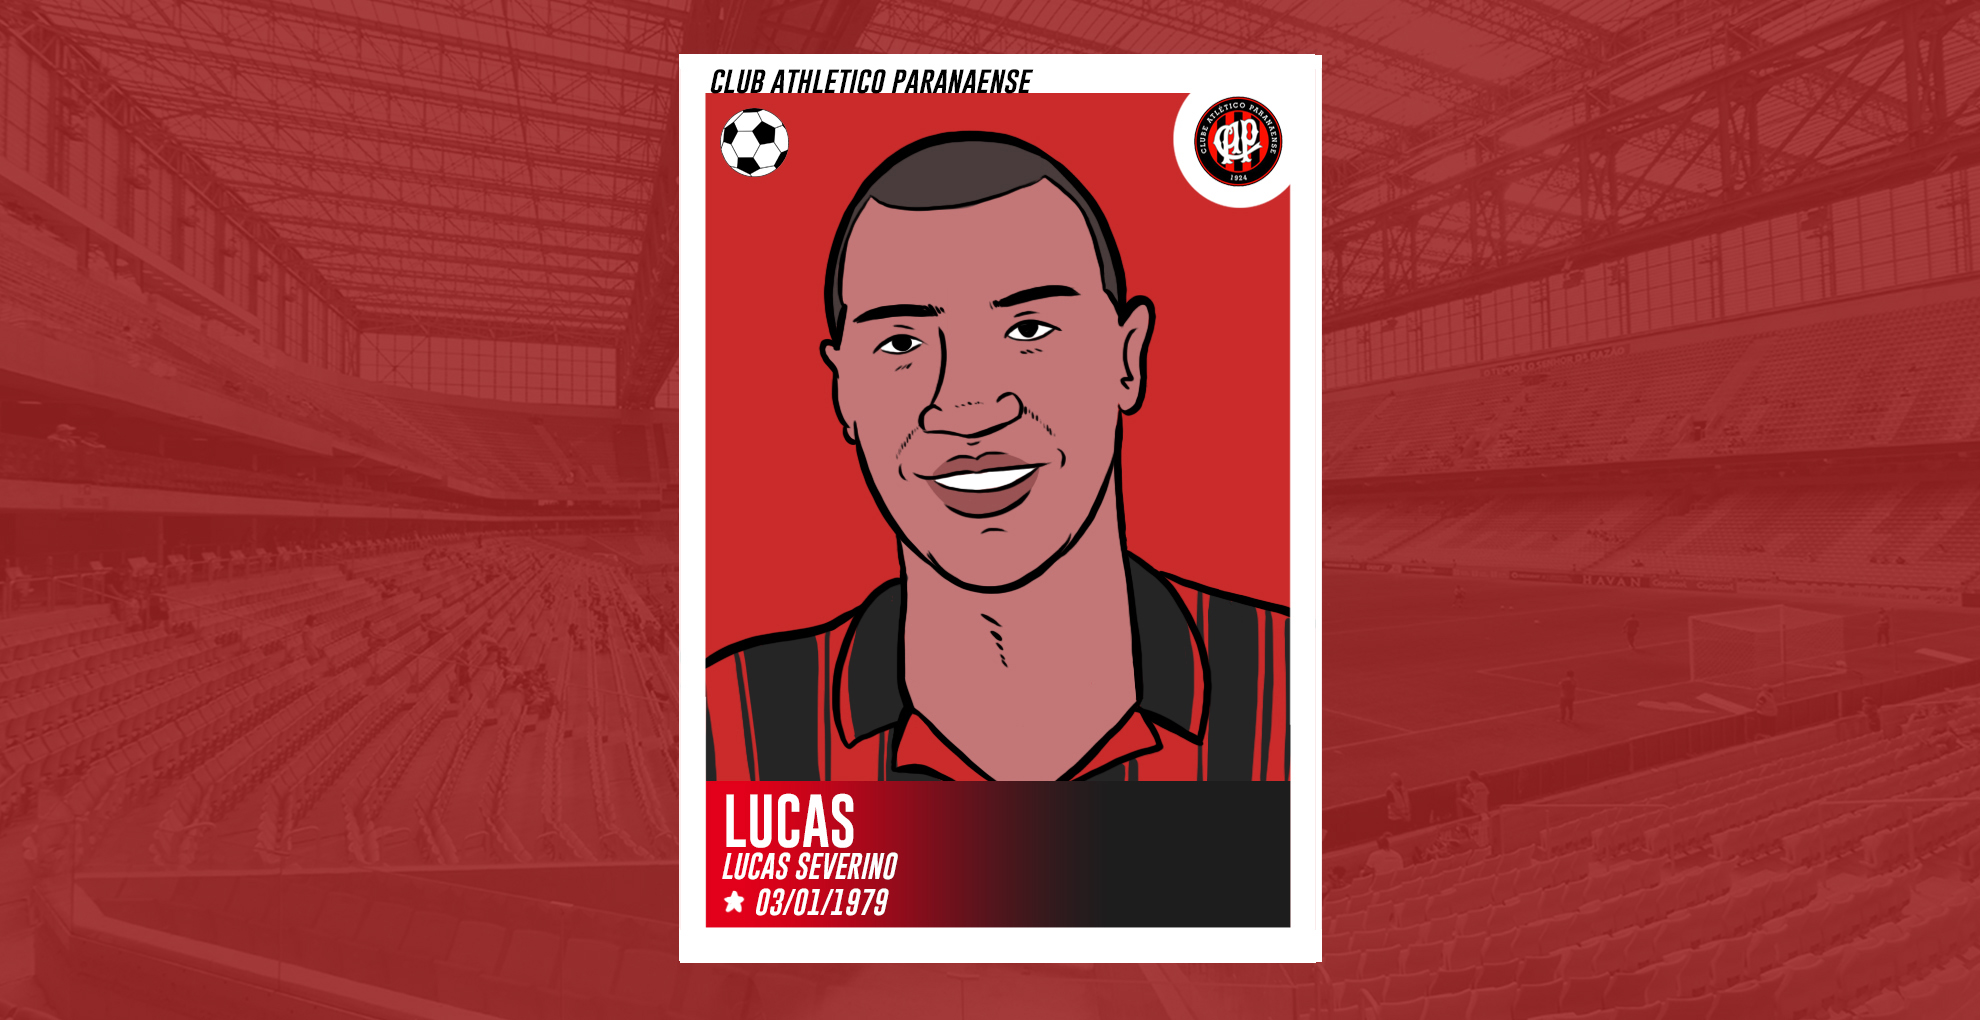 Athletico 100 years: Lucas, “I am Lucas”